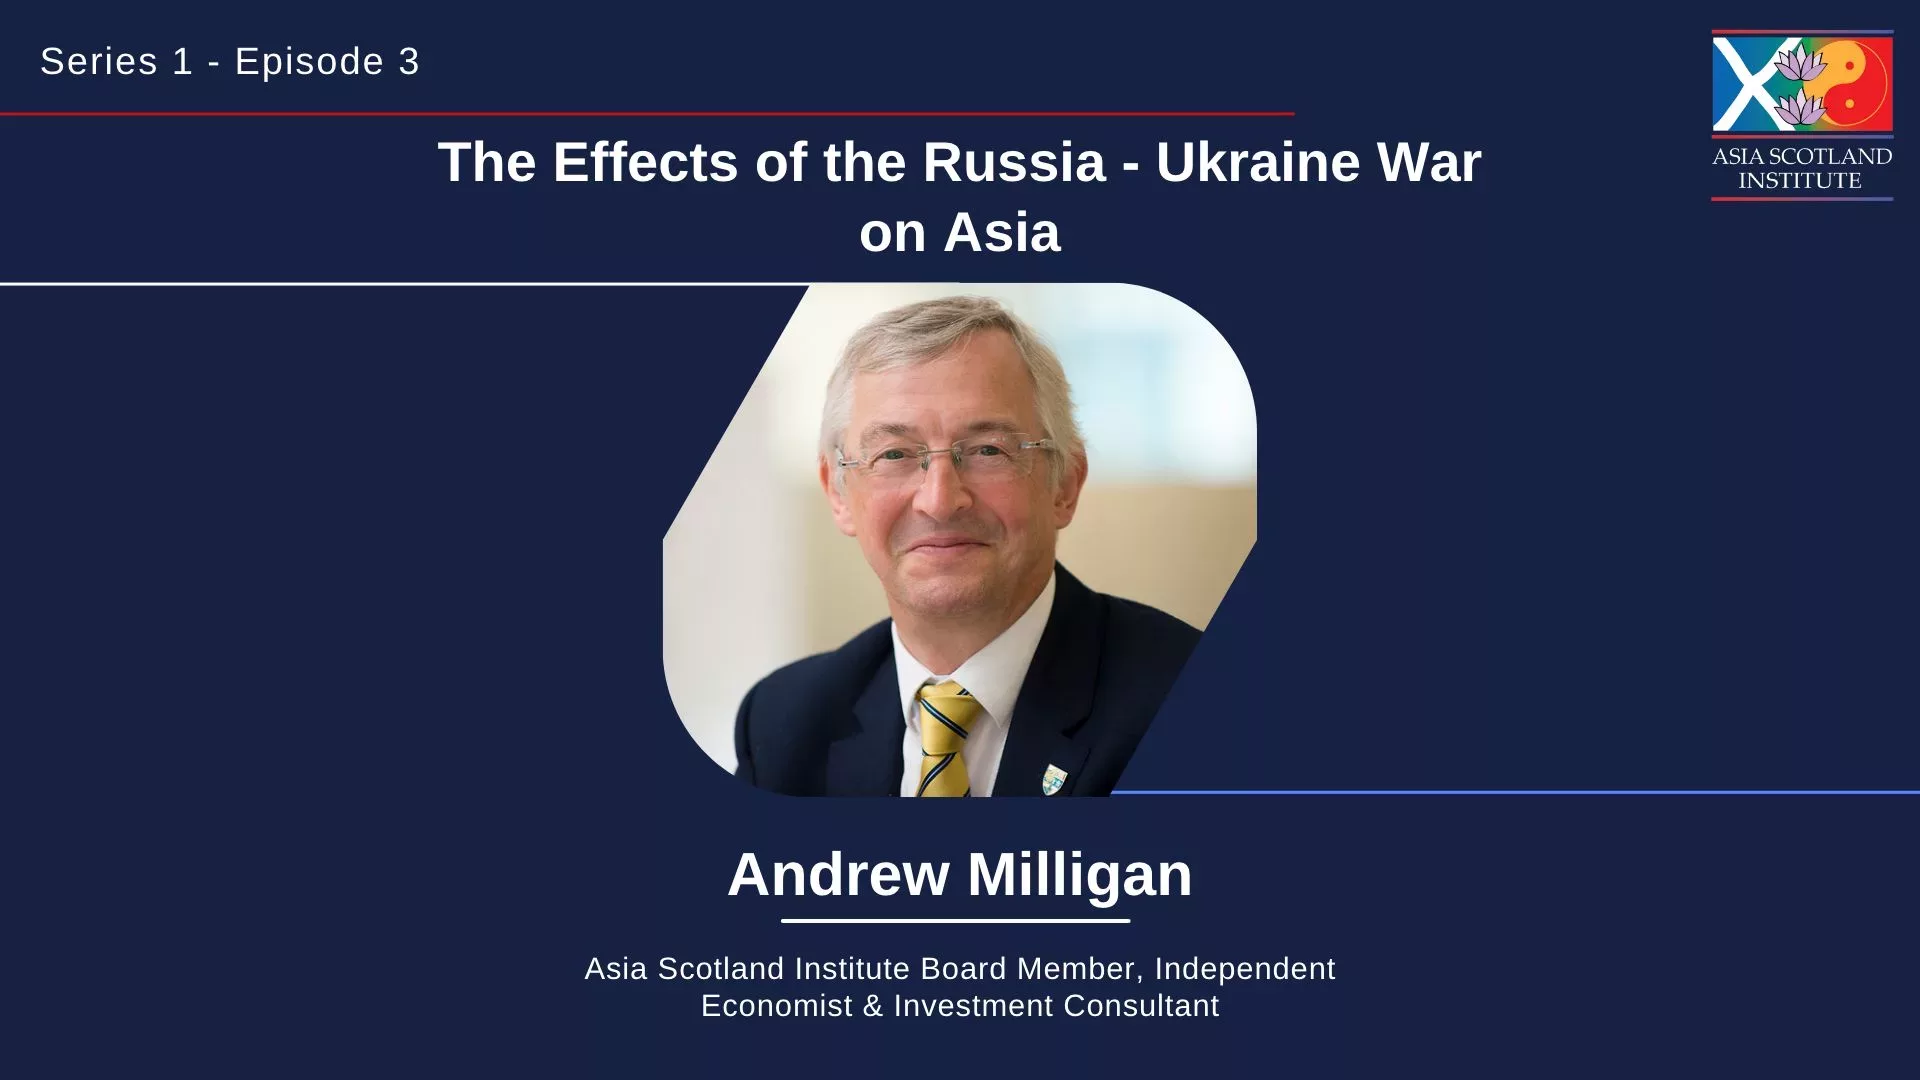 Podcast Episode 3 - The Effects of the Russia - Ukraine War on Asia